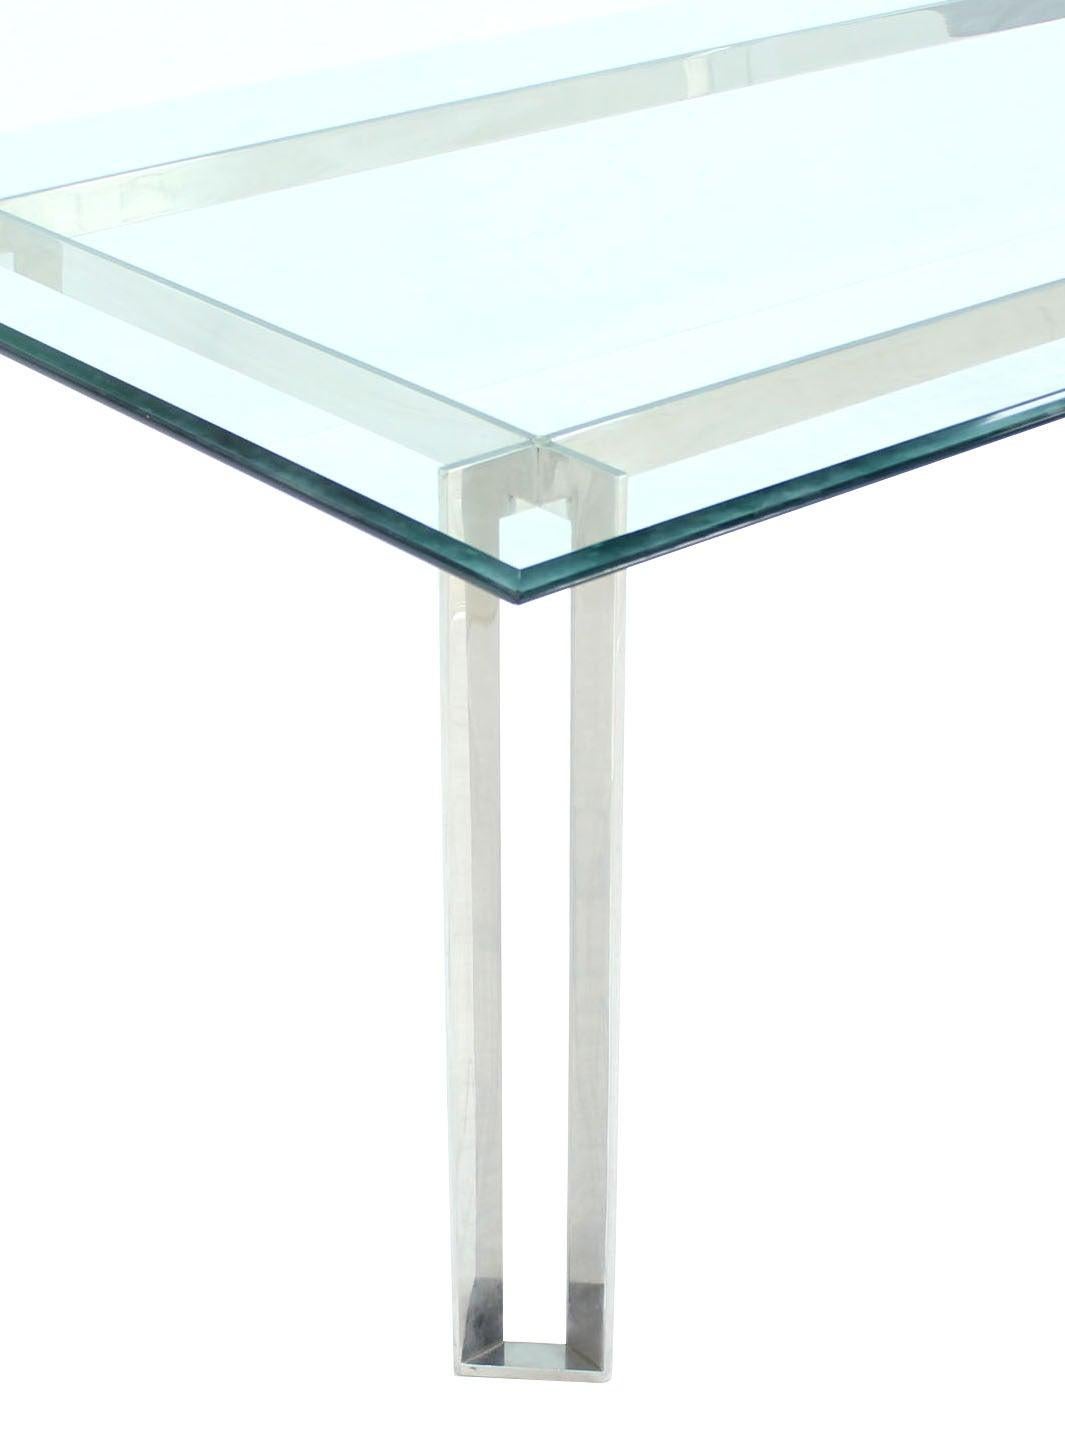 American Polished Stainless Steel Base  Thick Glass Top Dining Room Table Mid Century  For Sale